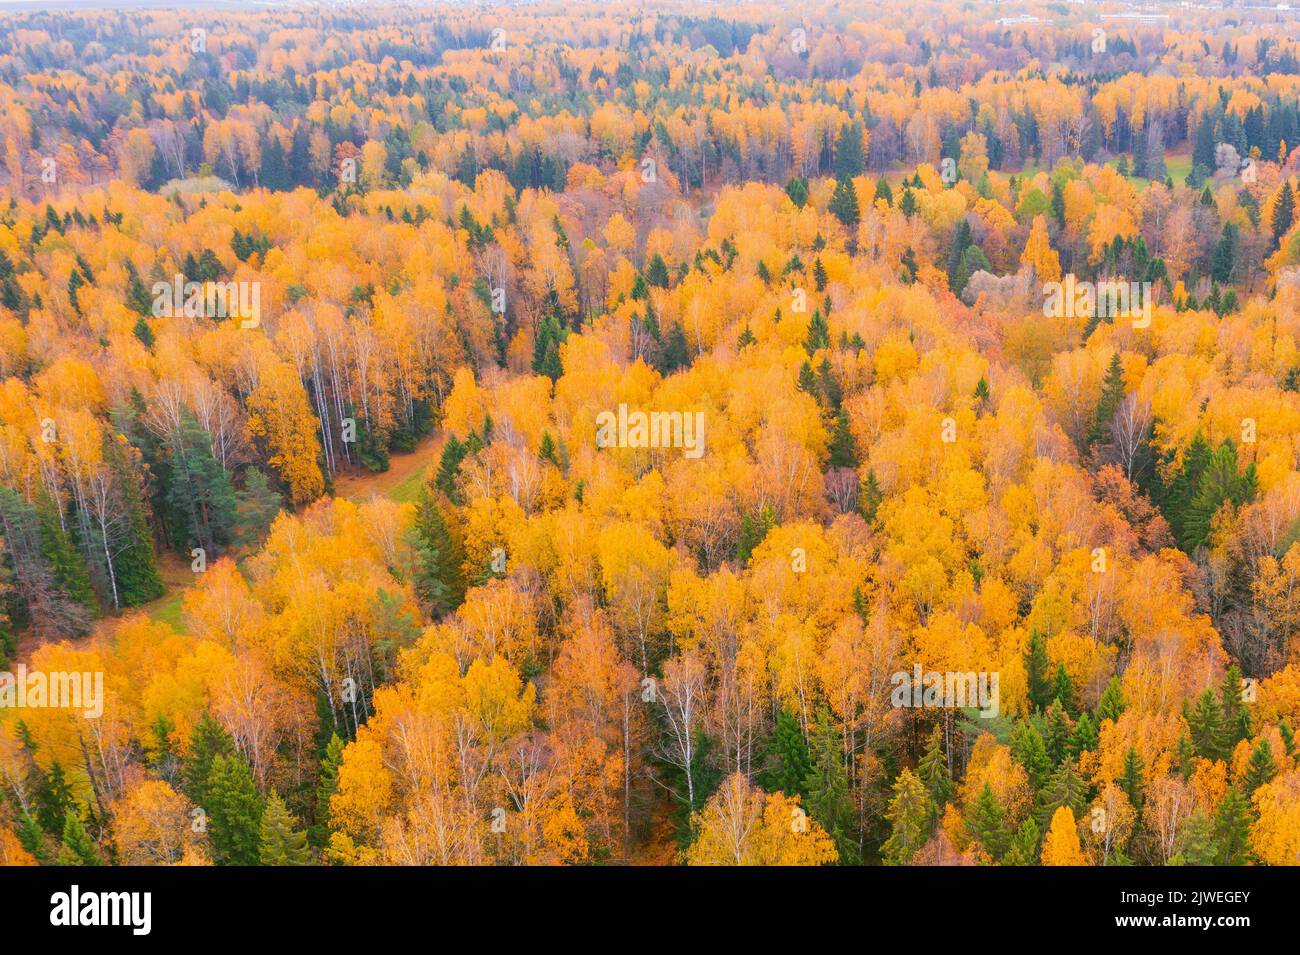 Aerial view of autumn spotted forest foliage with yellow roses and coniferous trees Stock Photo